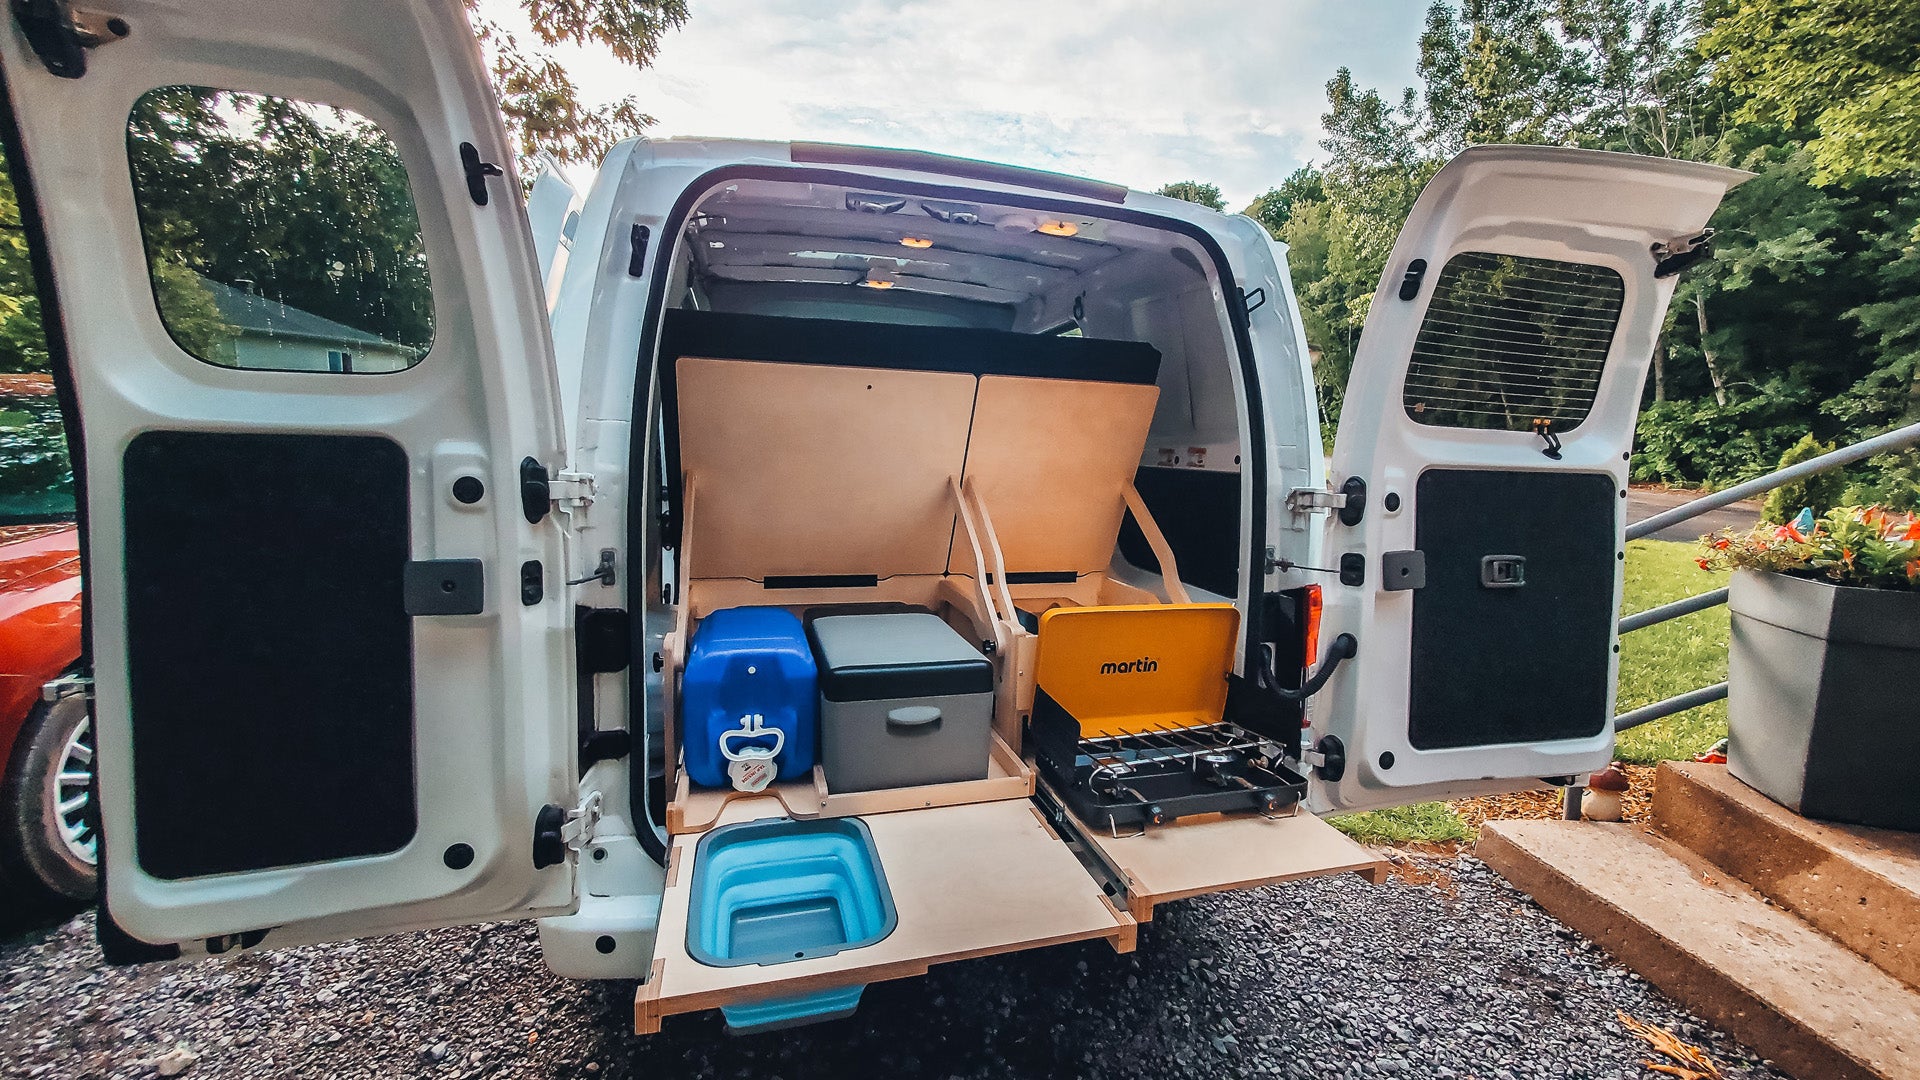 Conversion Kit for compact cargo vans